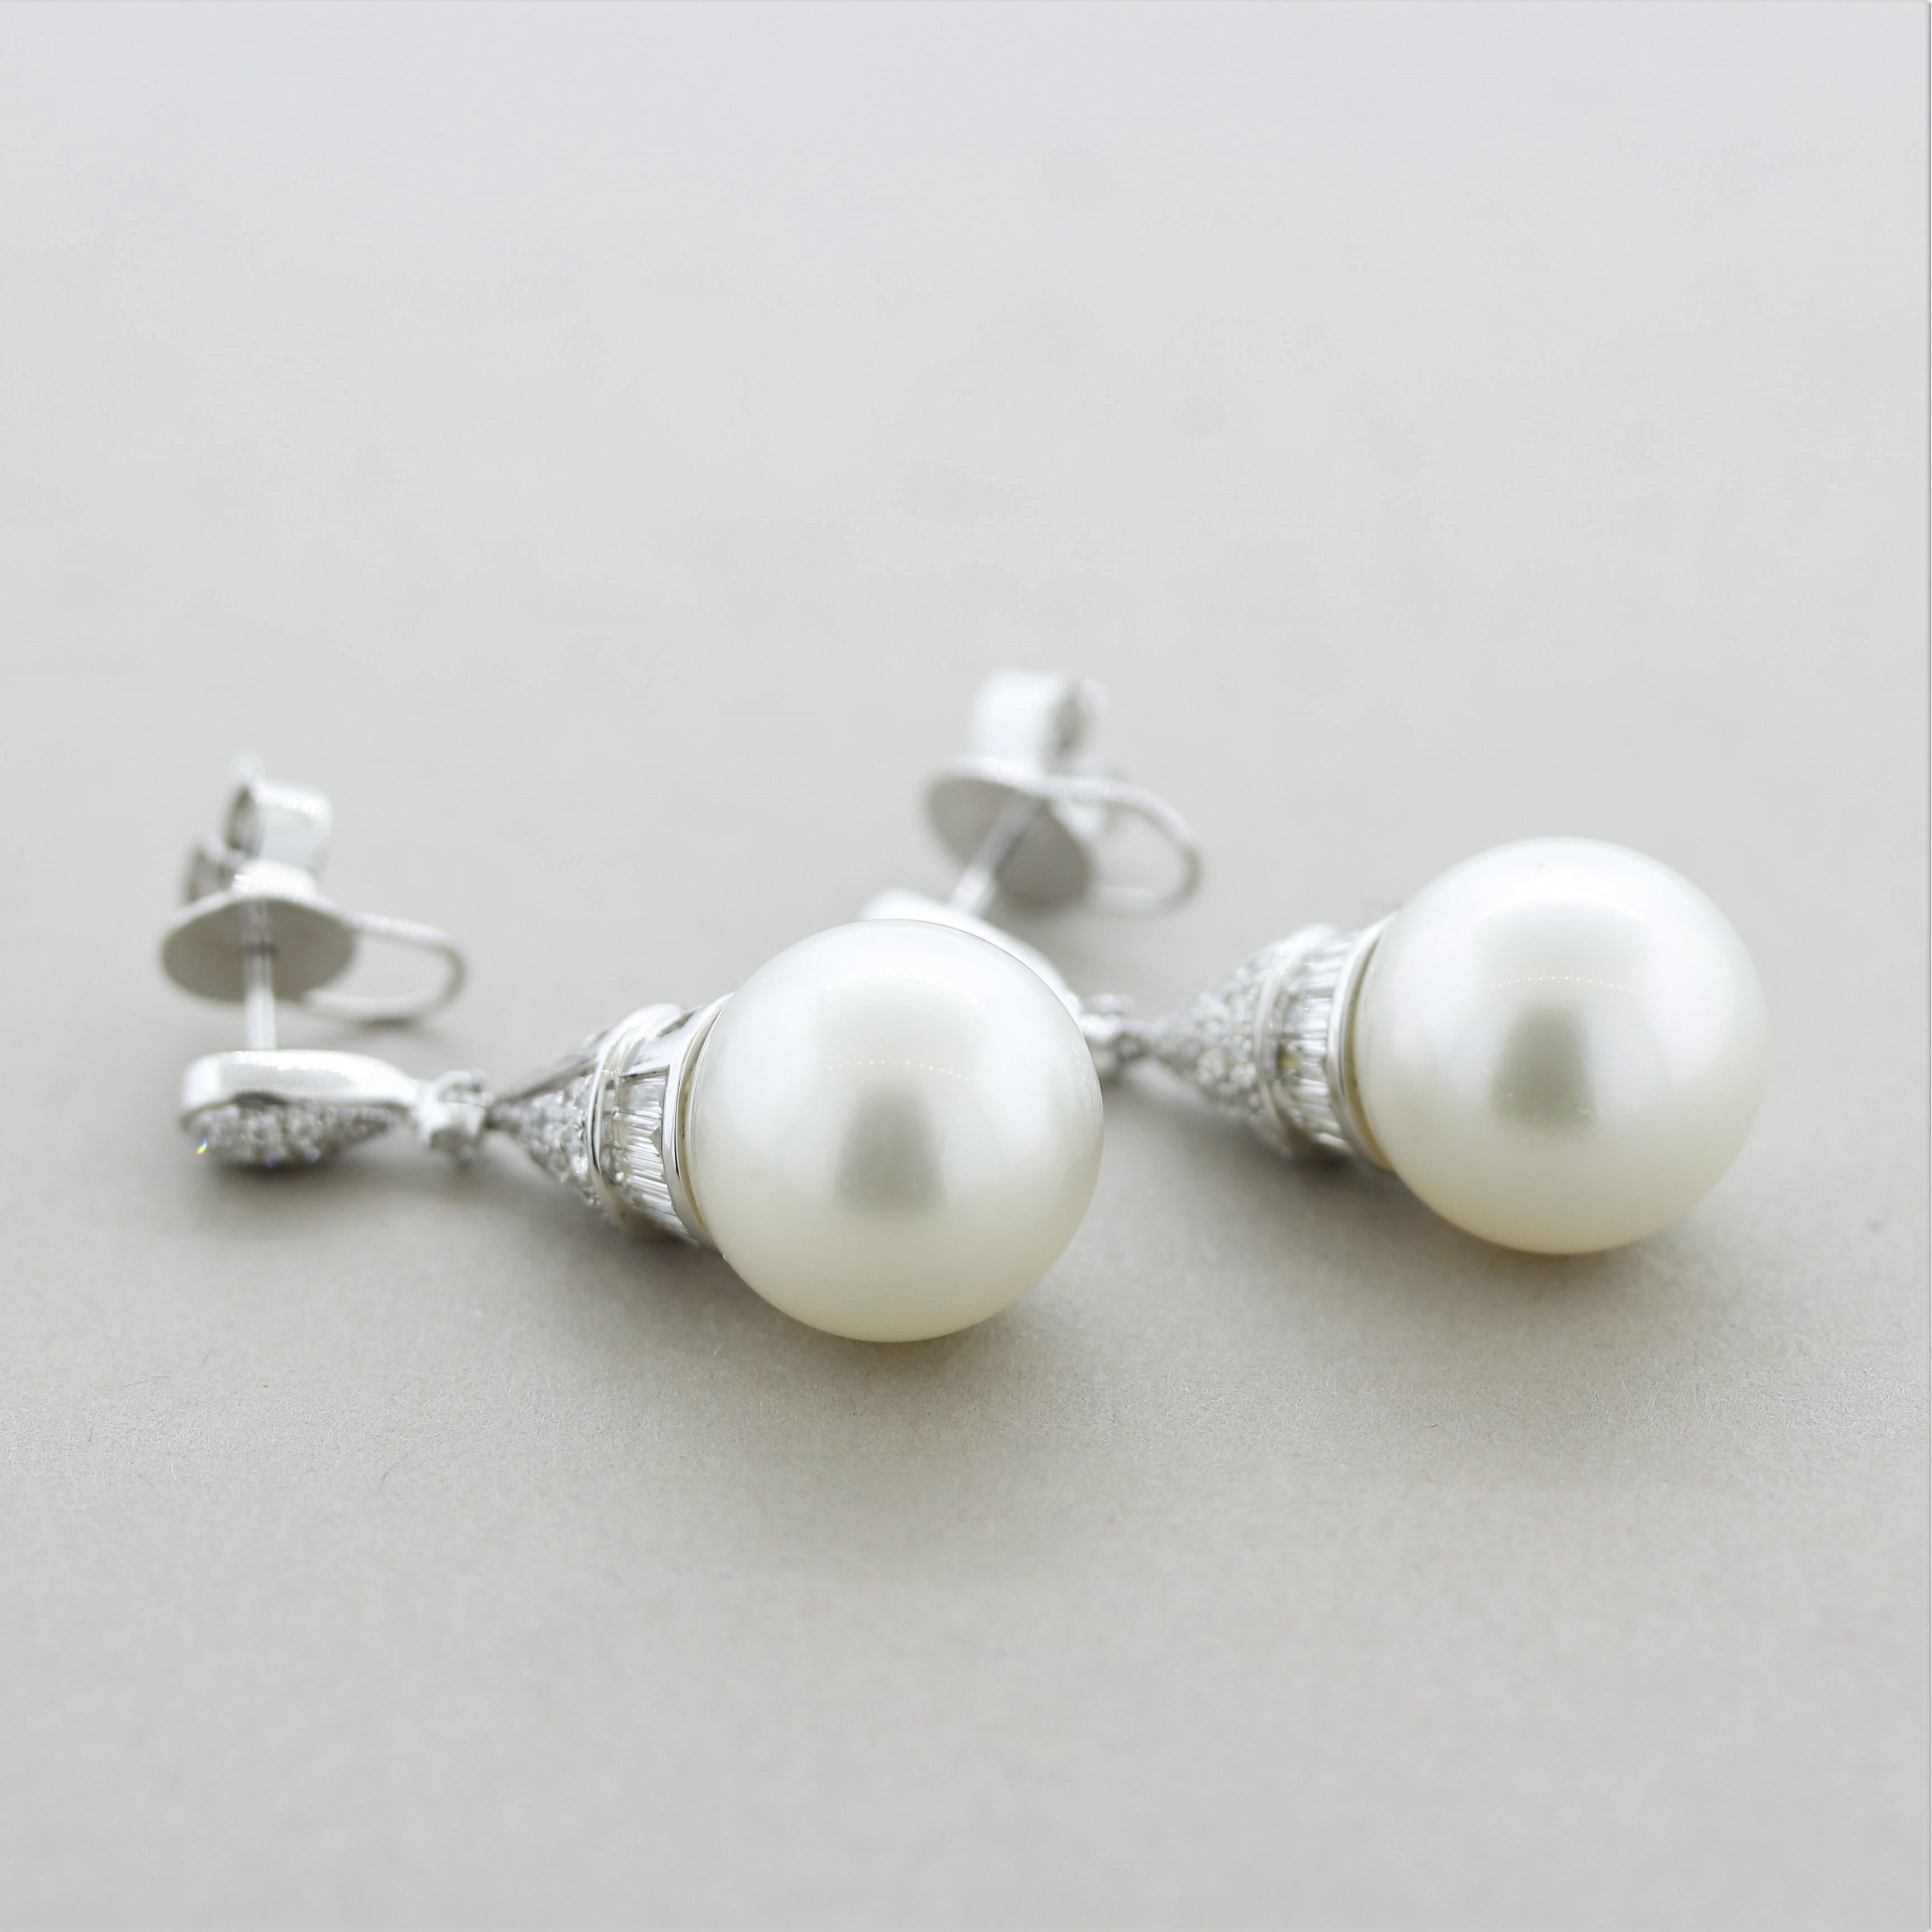 A fun, chic, and stylish pair of South Sea pearl earrings! The pearls are perfectly matching in size (13mm), shape, and color as they both are blemish free and have an excellent luster as light rows across their surfaces. They are accented by 1.04